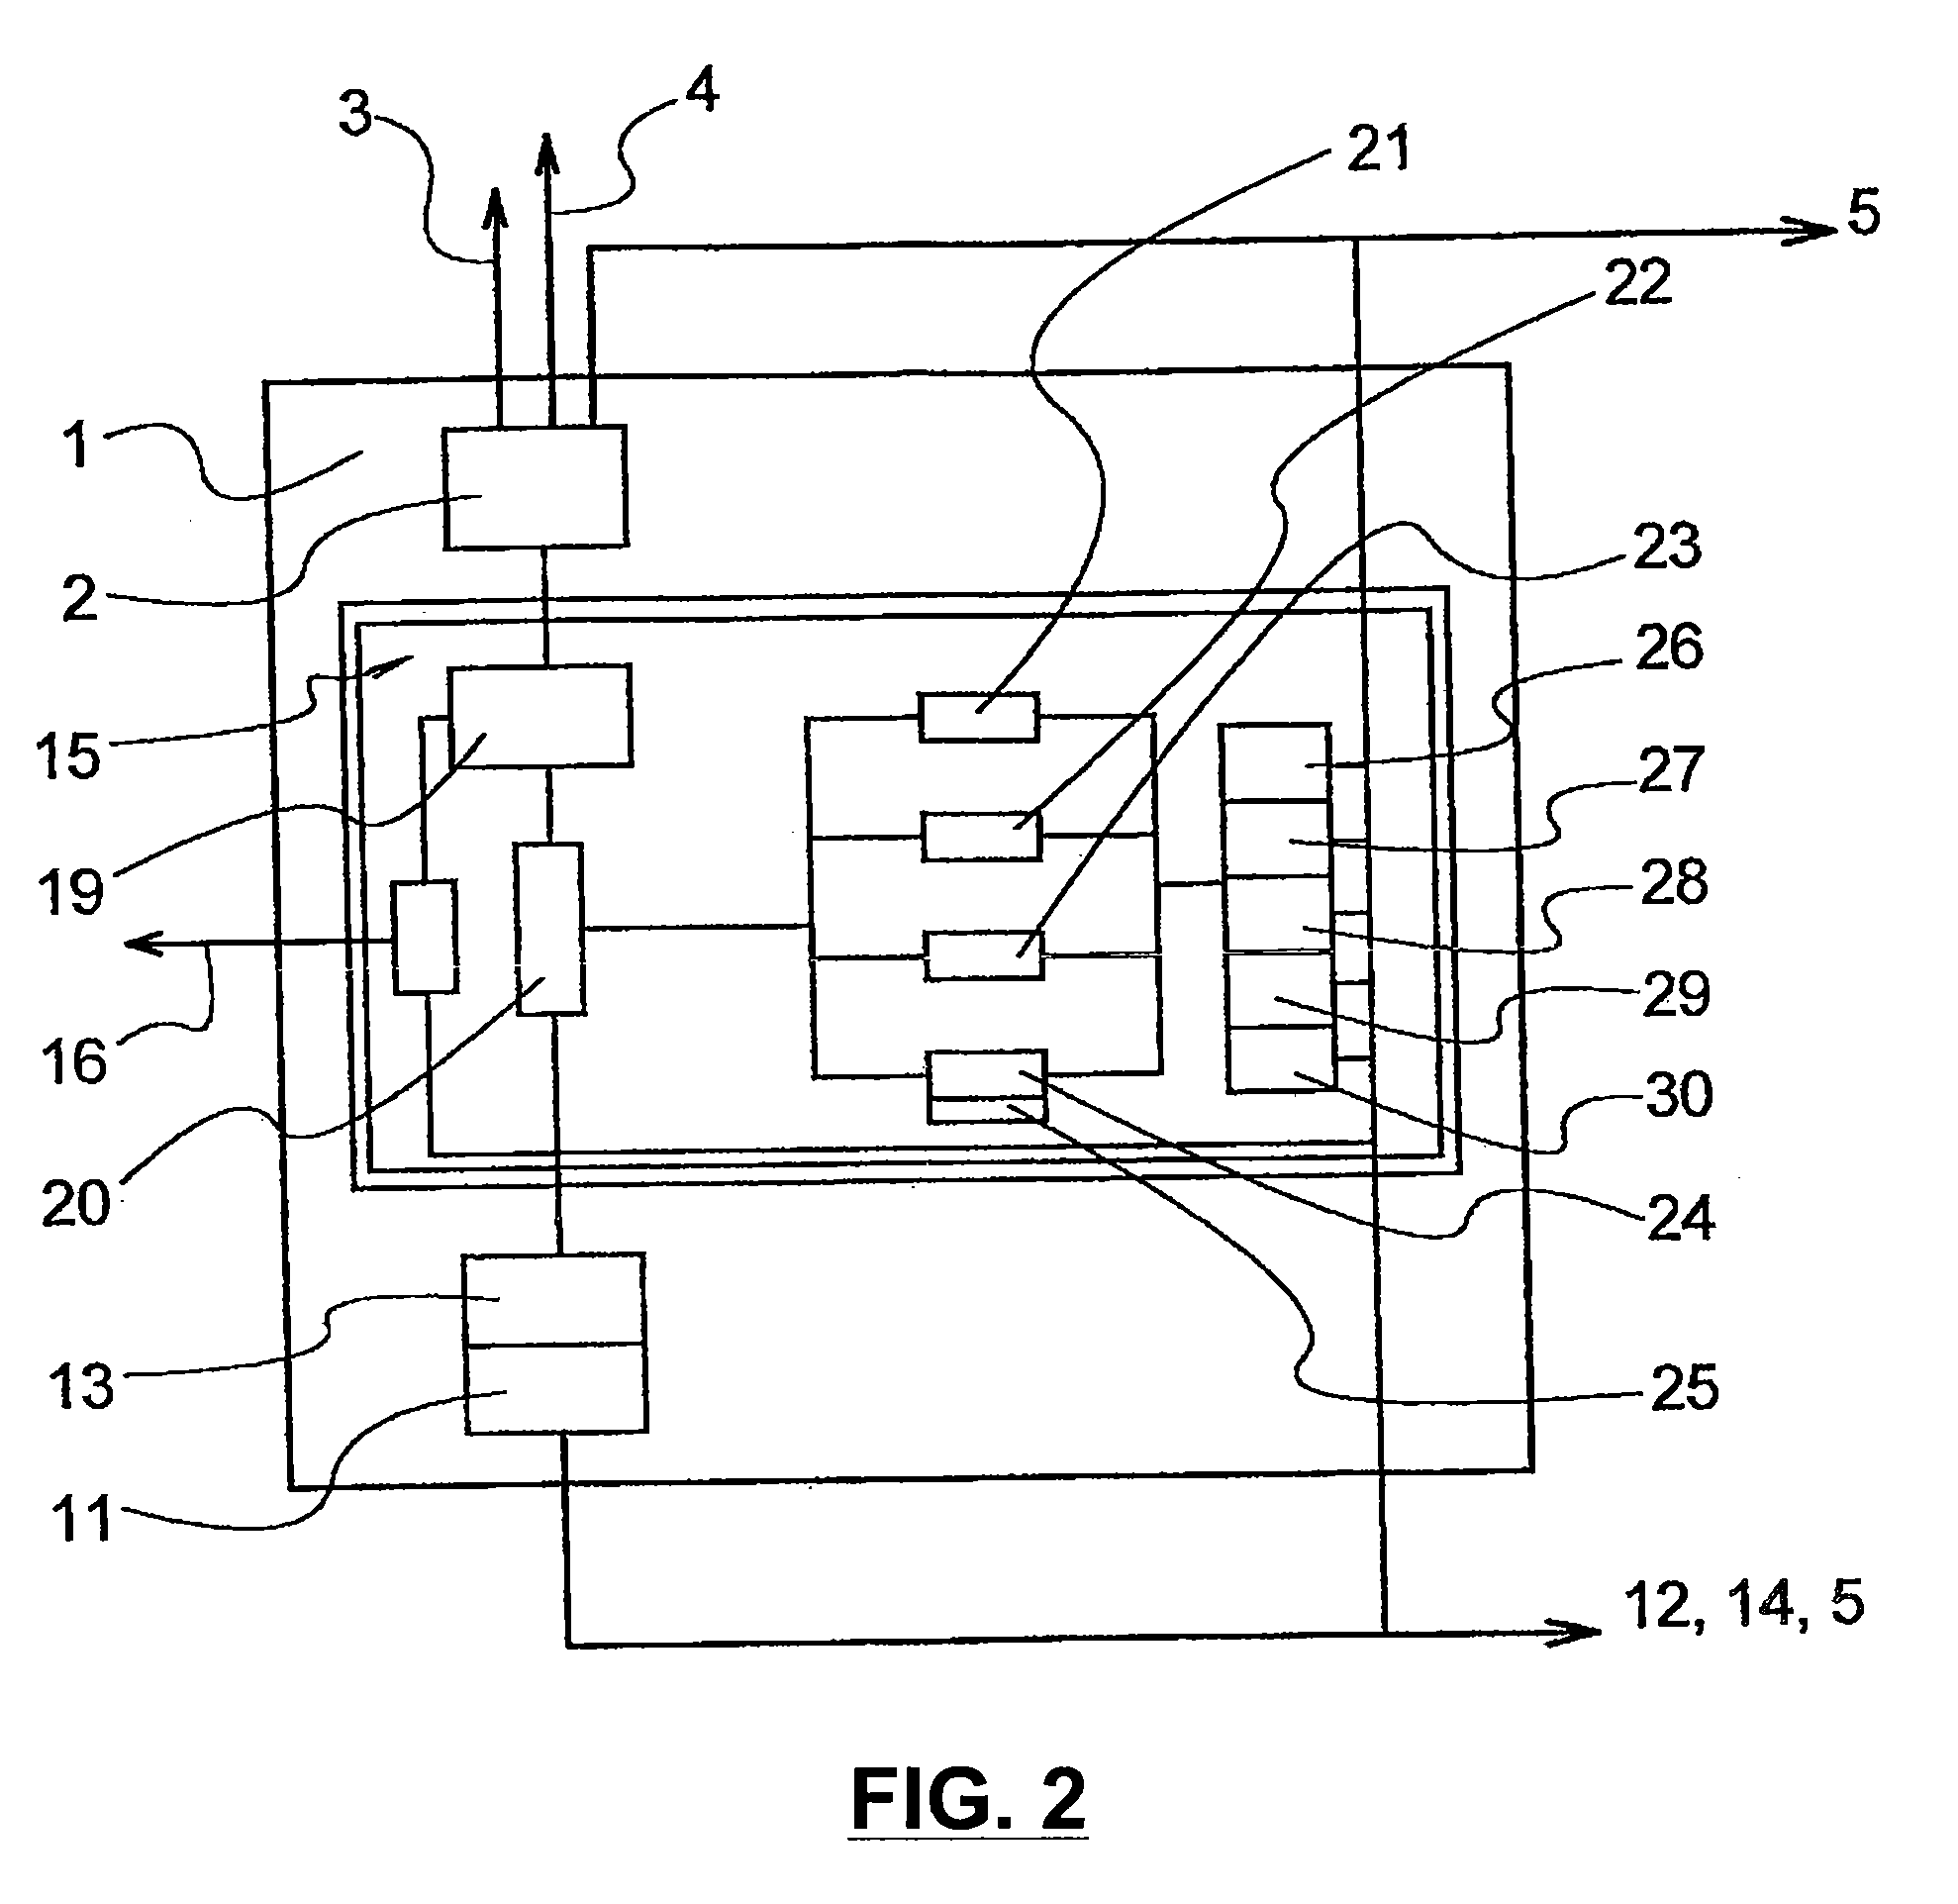 Device and method for providing automatic assistance to air traffic controllers